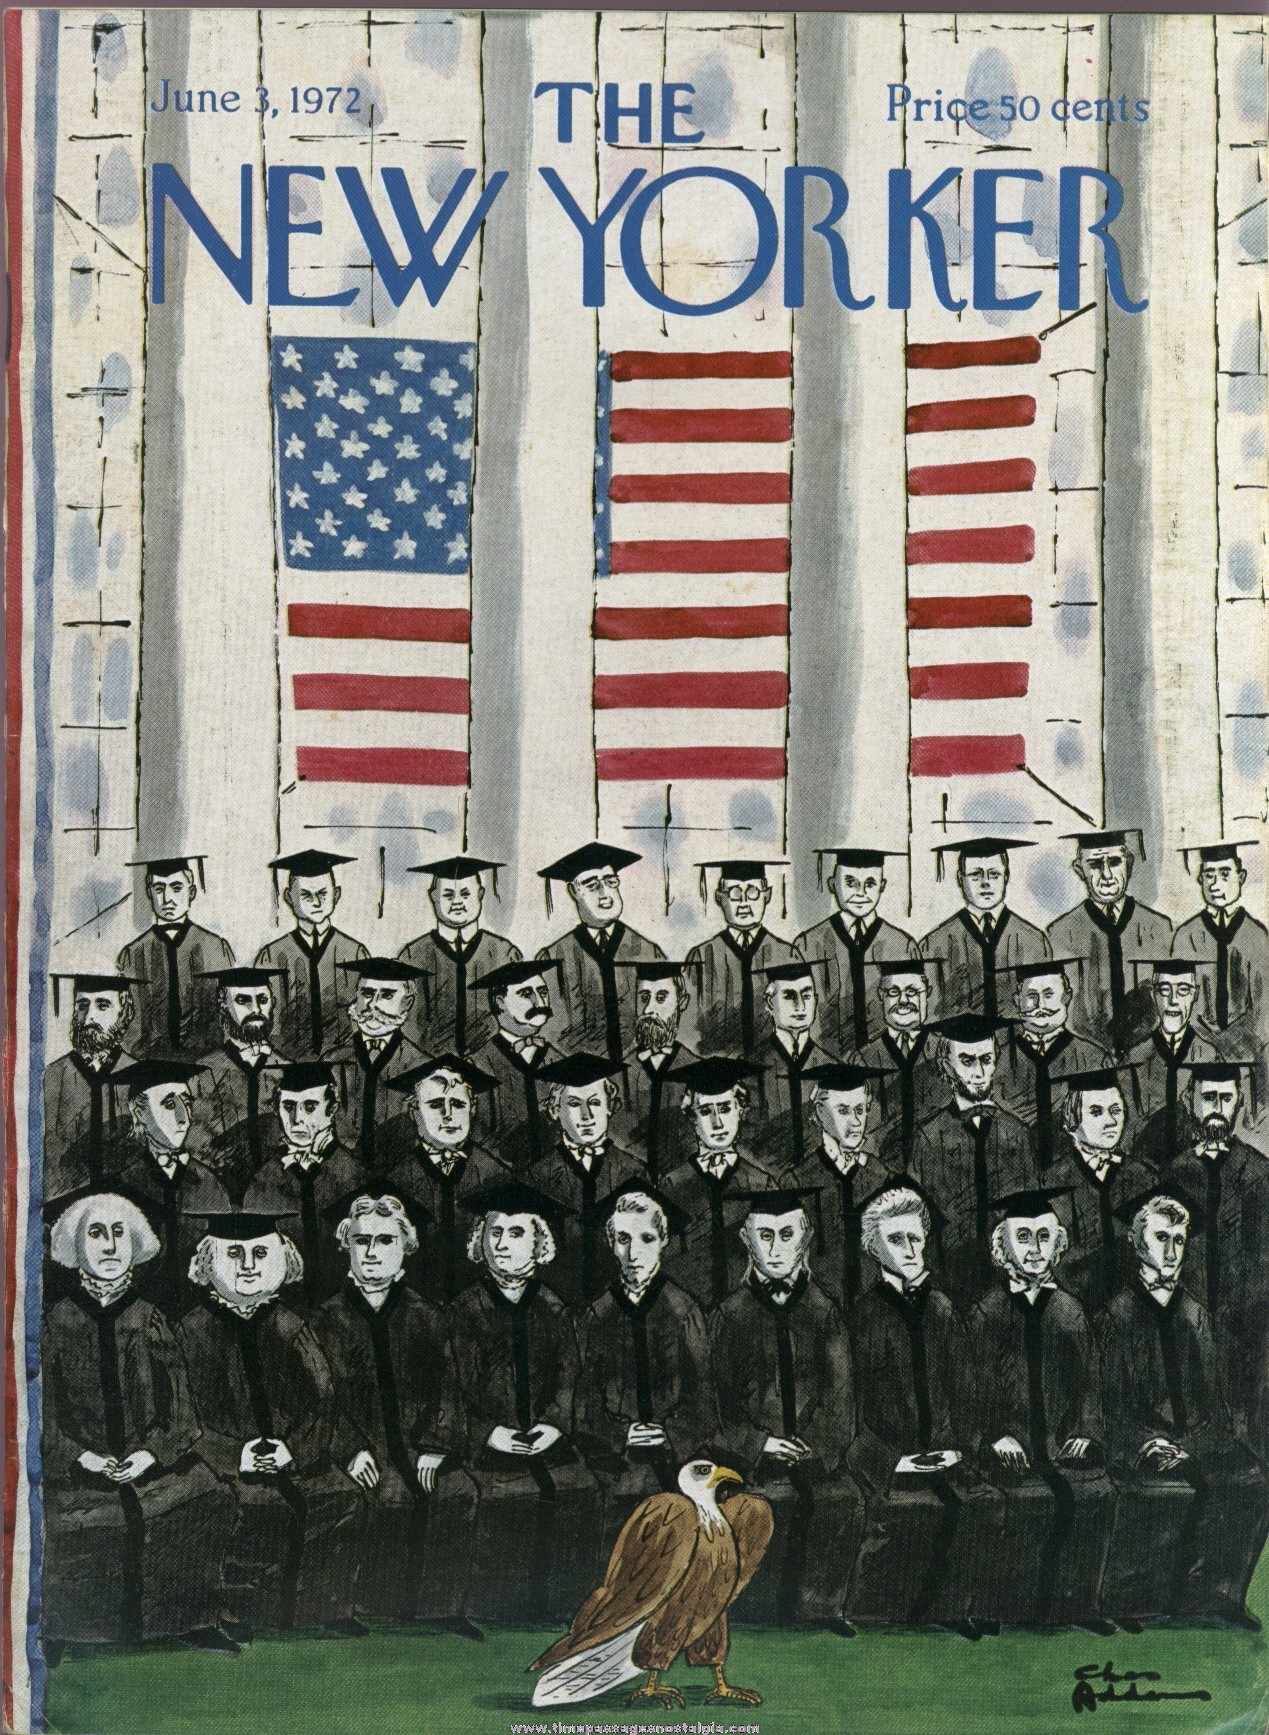 New Yorker Magazine - June 3, 1972 - Cover by Charles (Chas) Addams